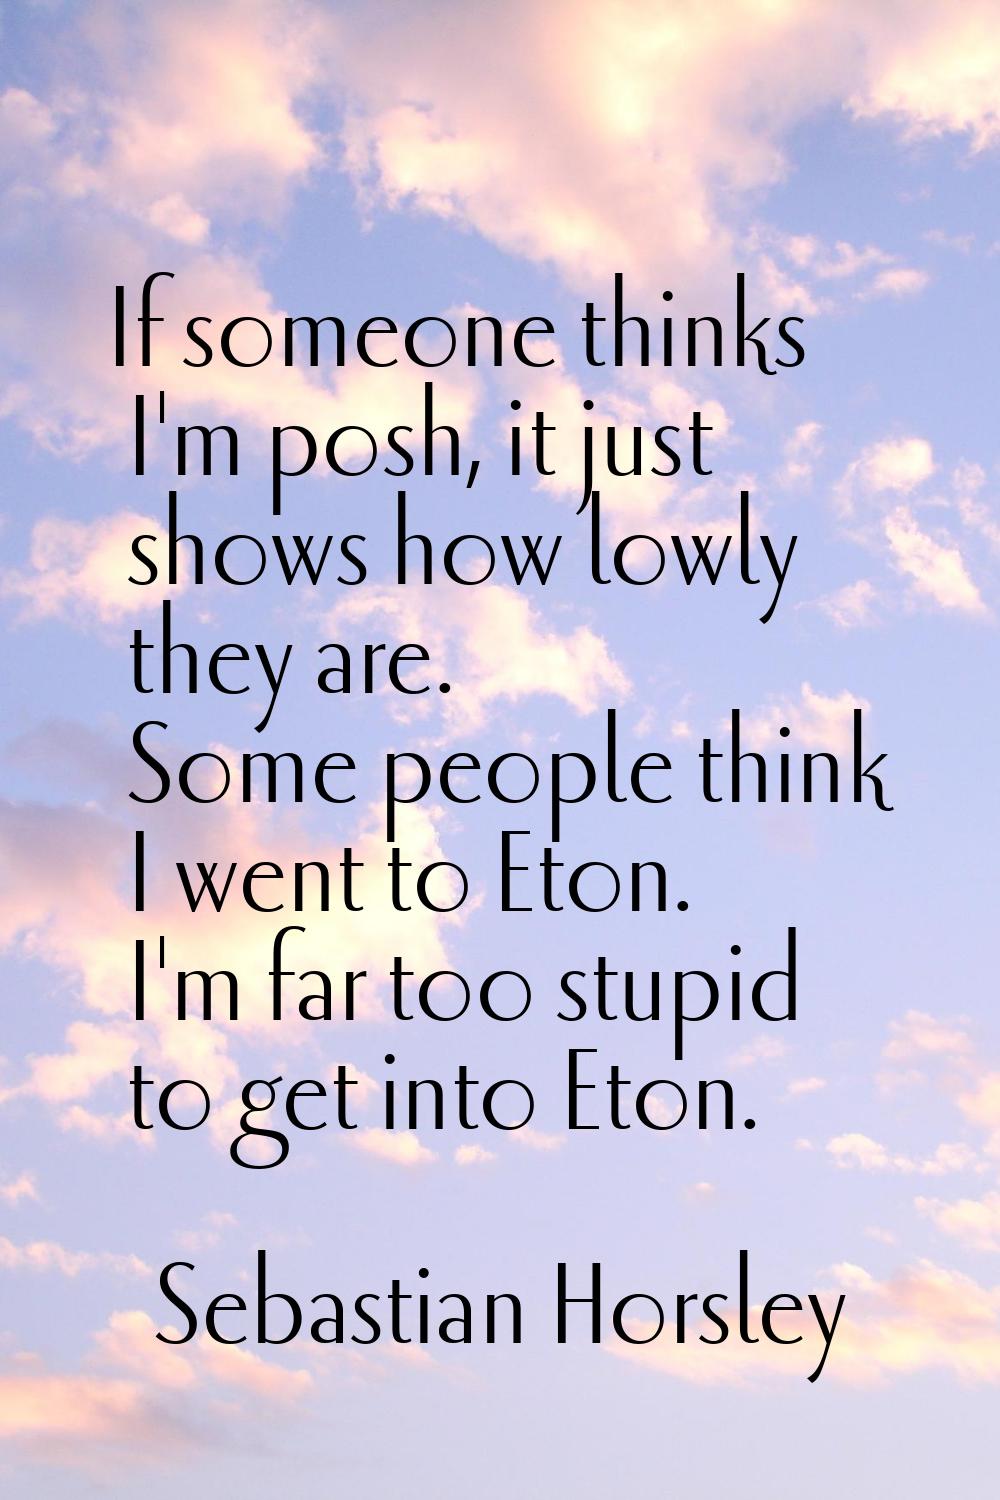 If someone thinks I'm posh, it just shows how lowly they are. Some people think I went to Eton. I'm